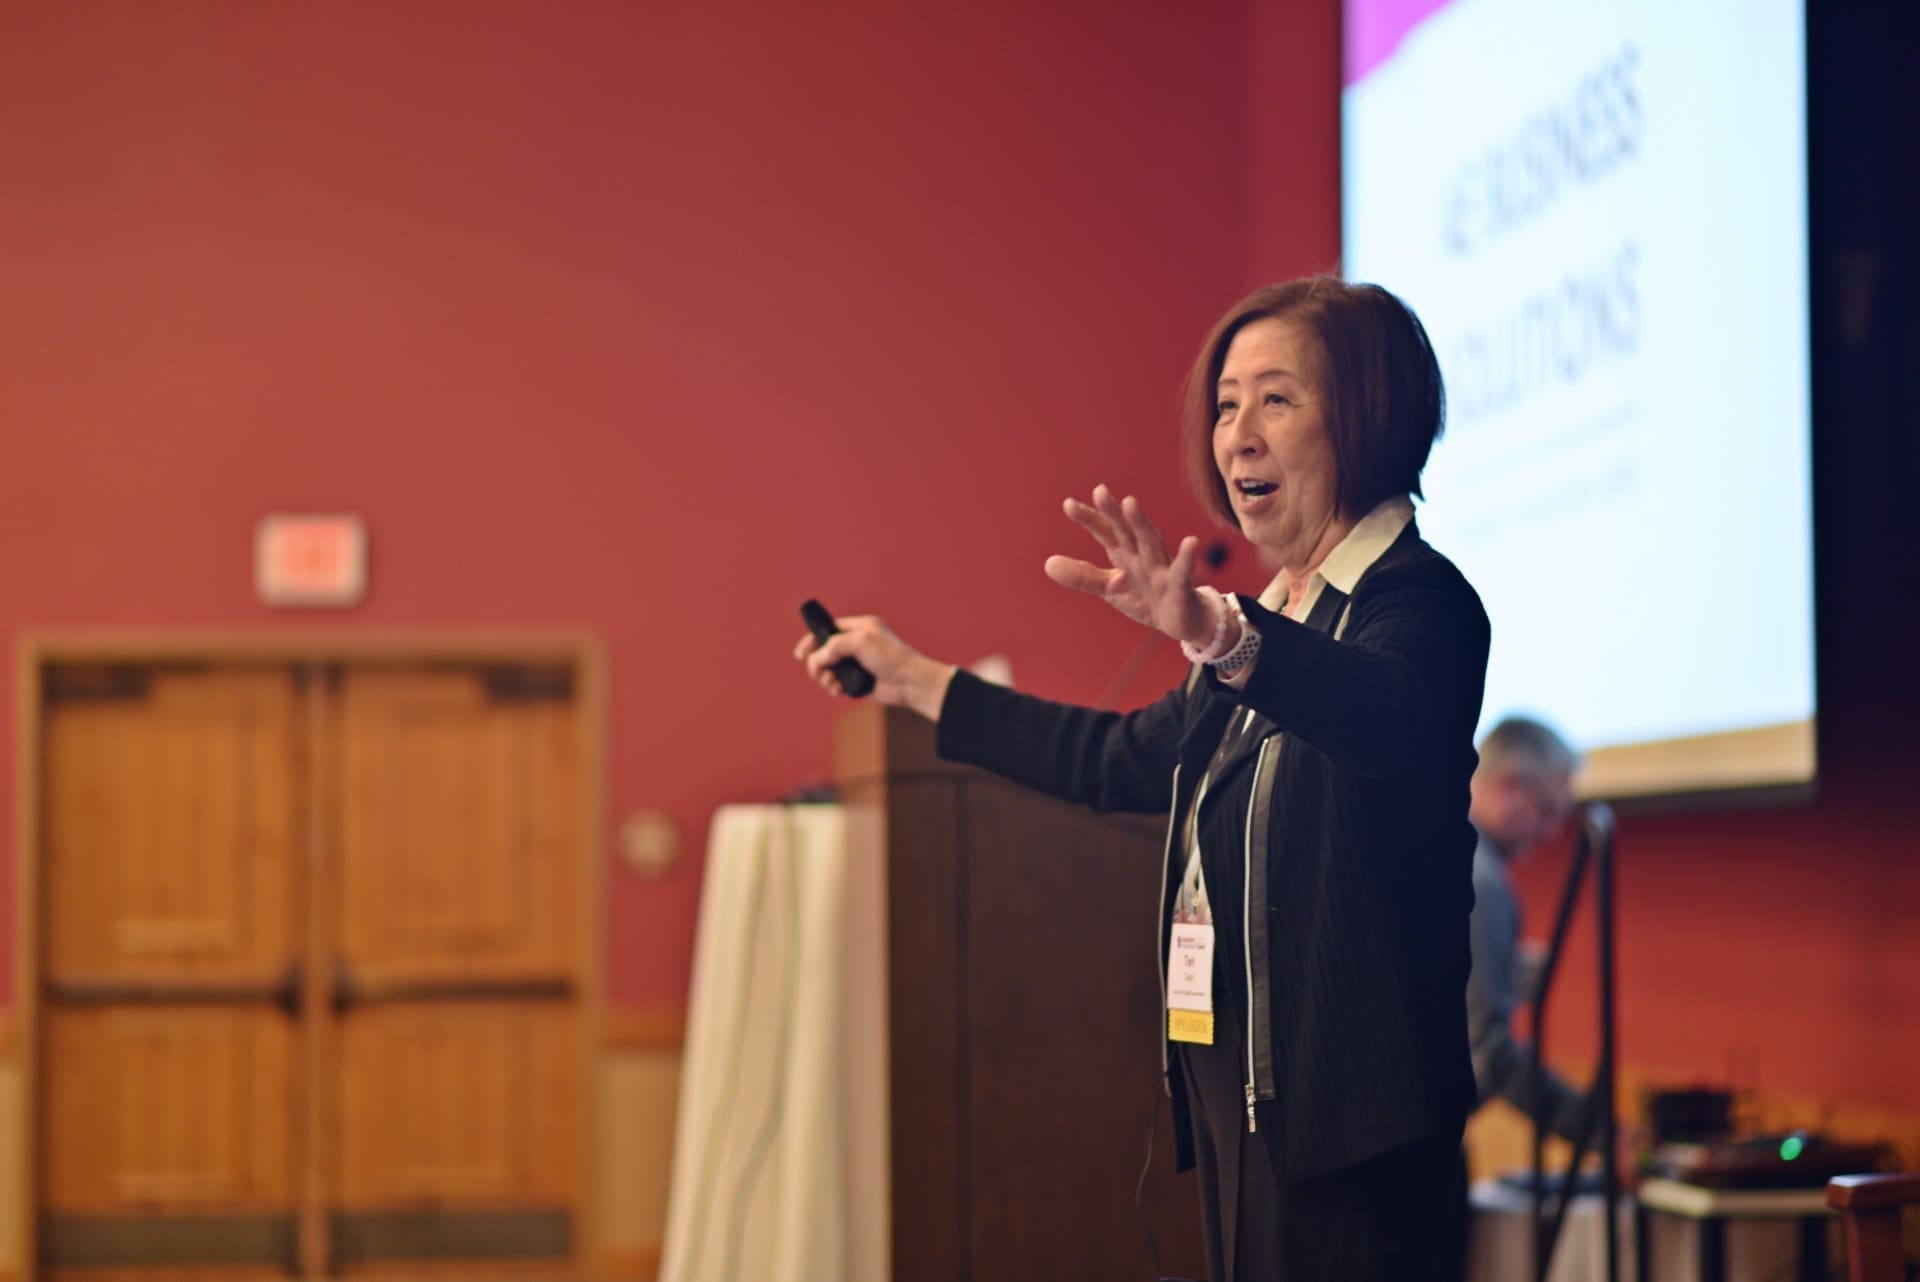 Wisconsin Governor's Cybersecurity Summit Highlights Women in Cyber